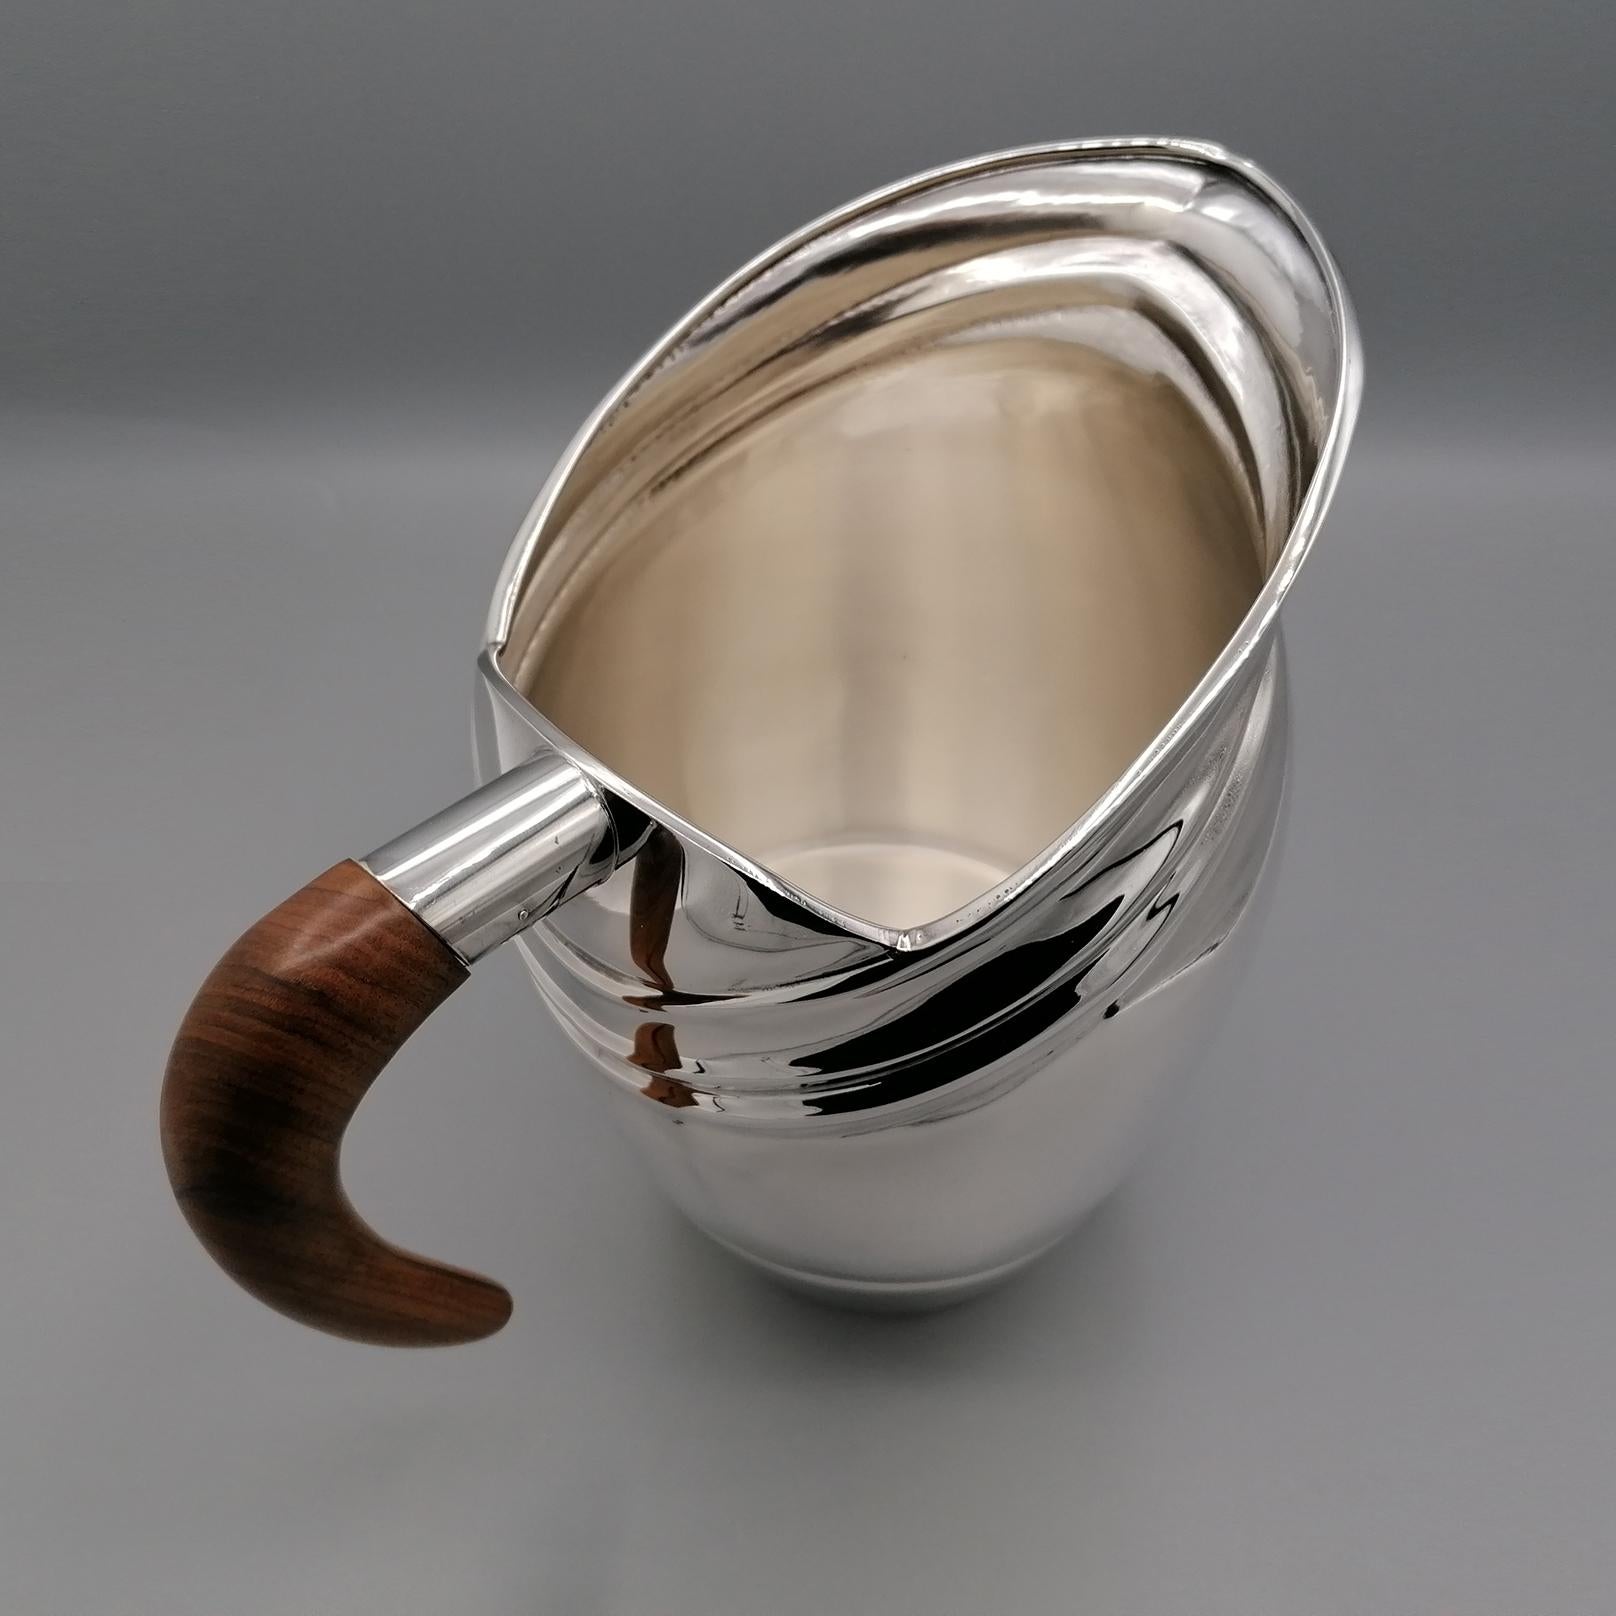 21st Century Italian Art Deco style Sterling Silver Water jug with wood handle For Sale 2